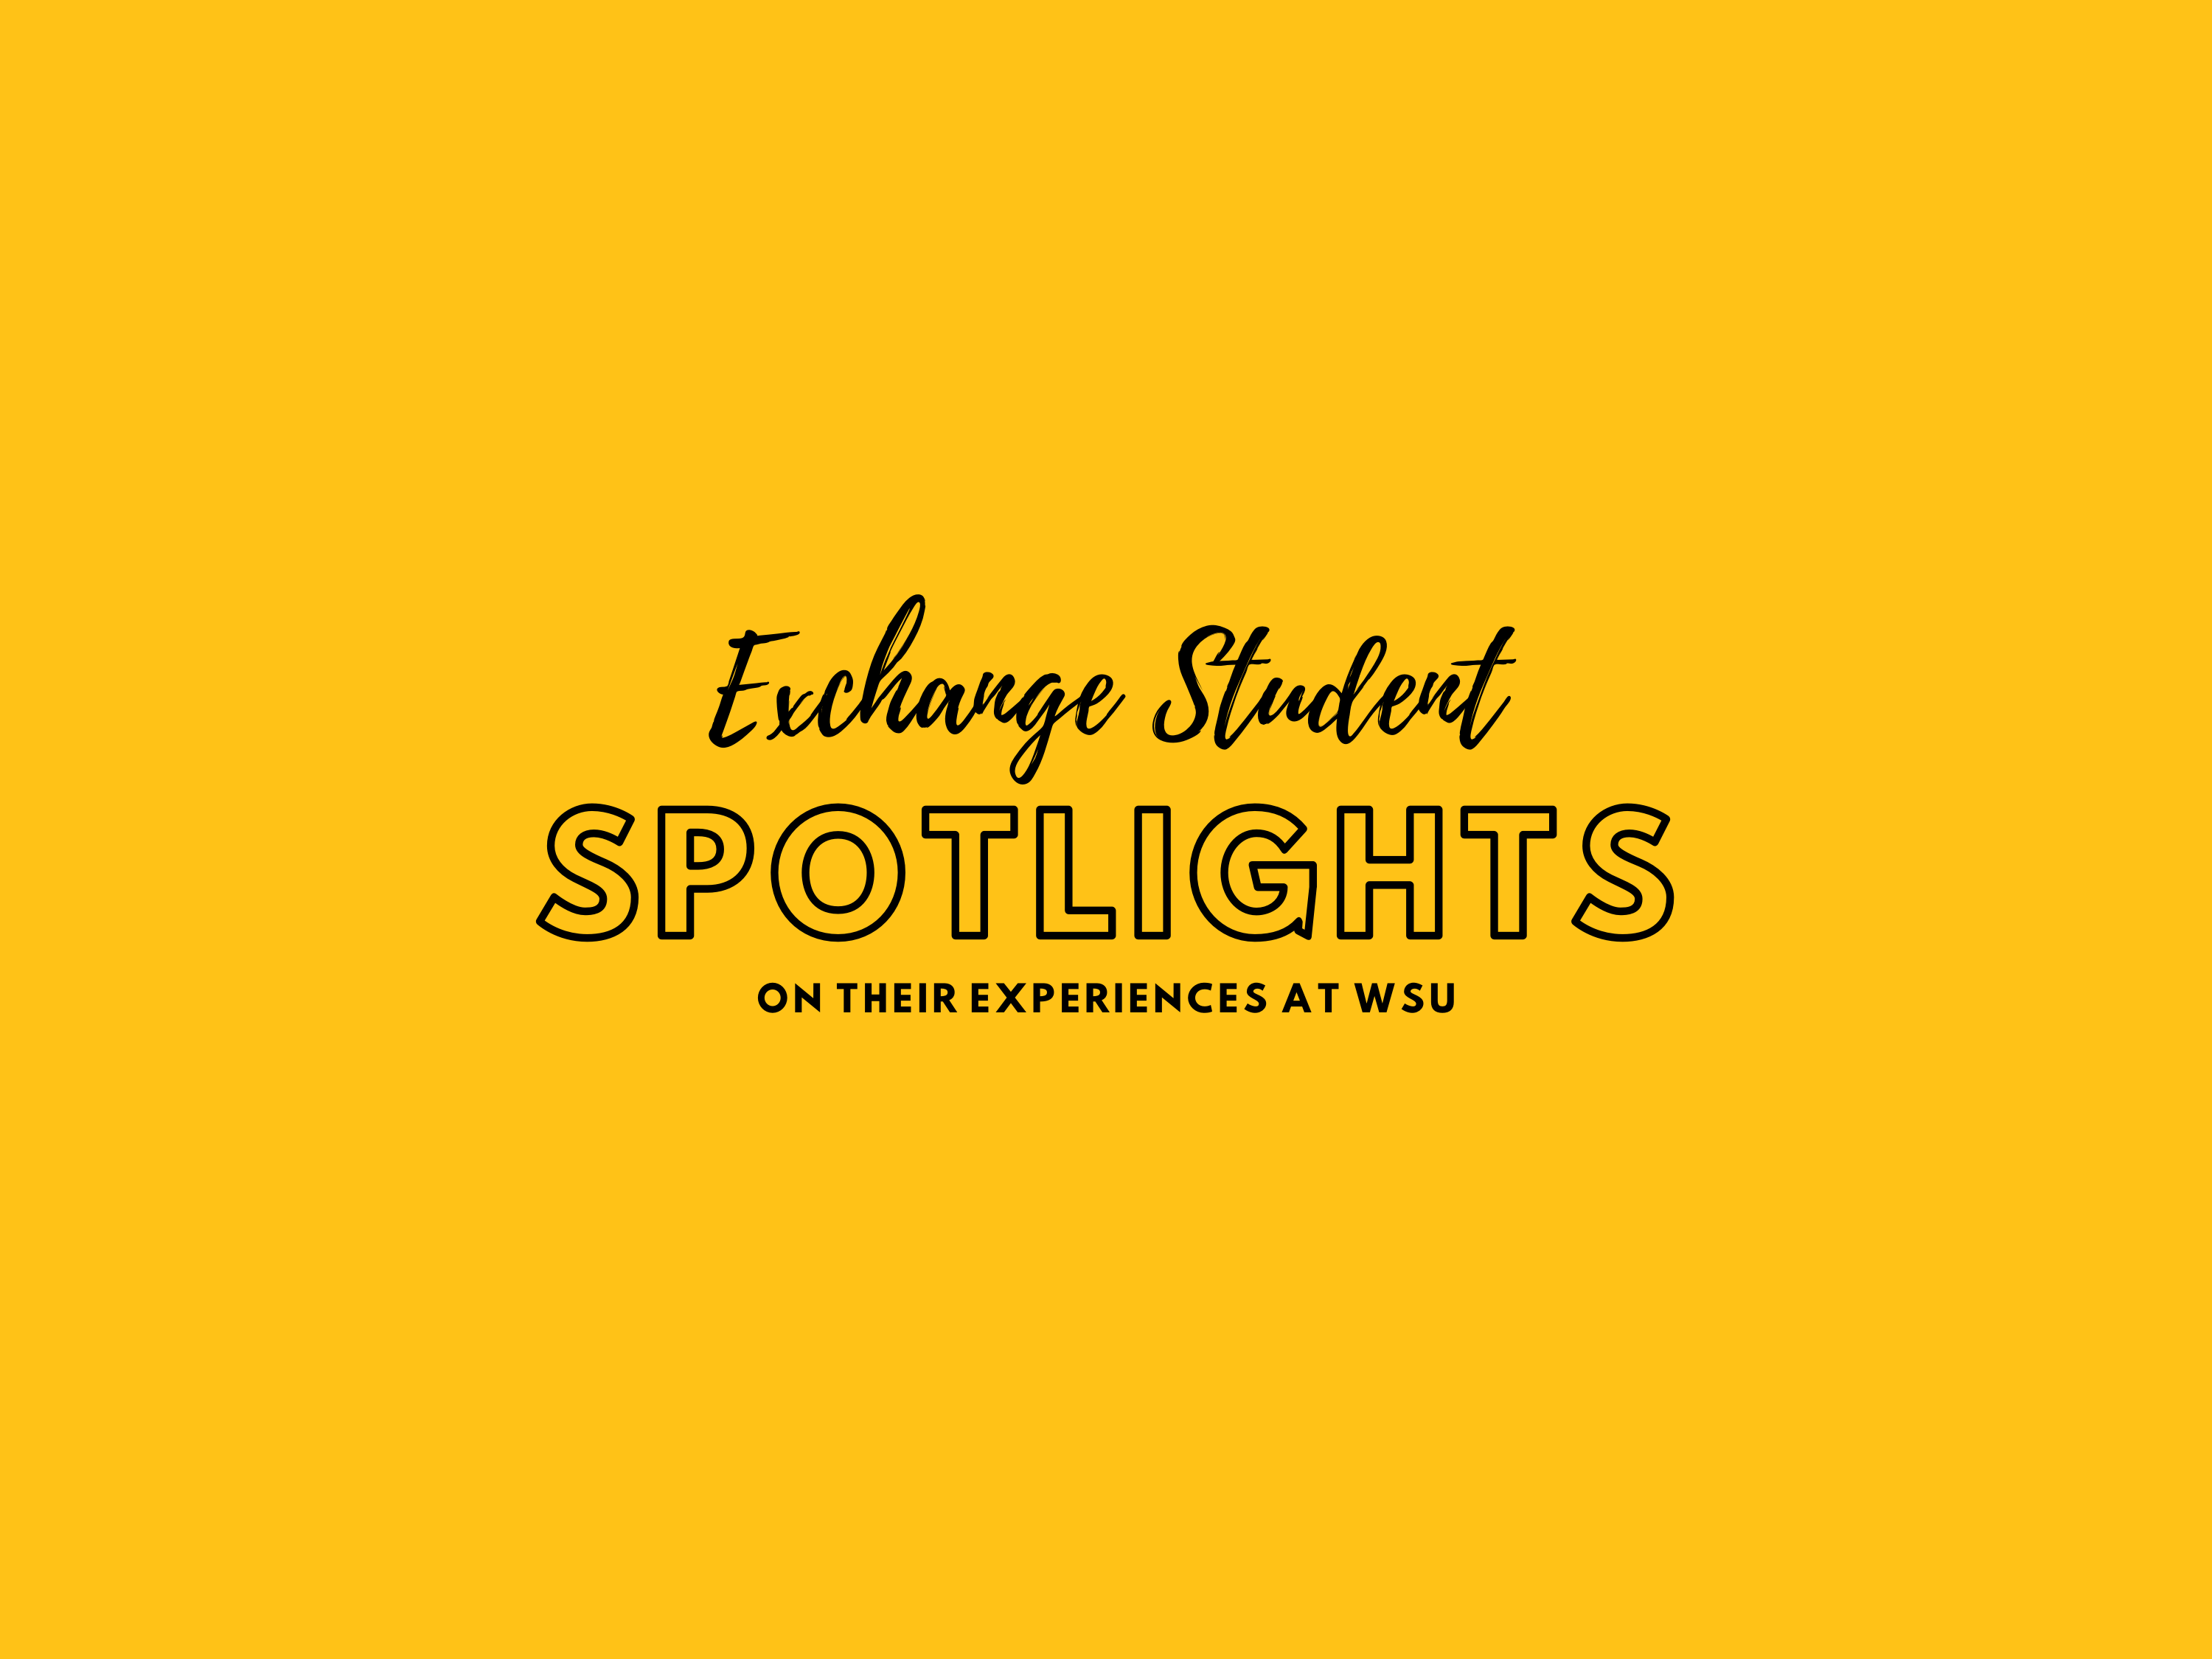 Exchange Student Spotlights on their experiences at WSU